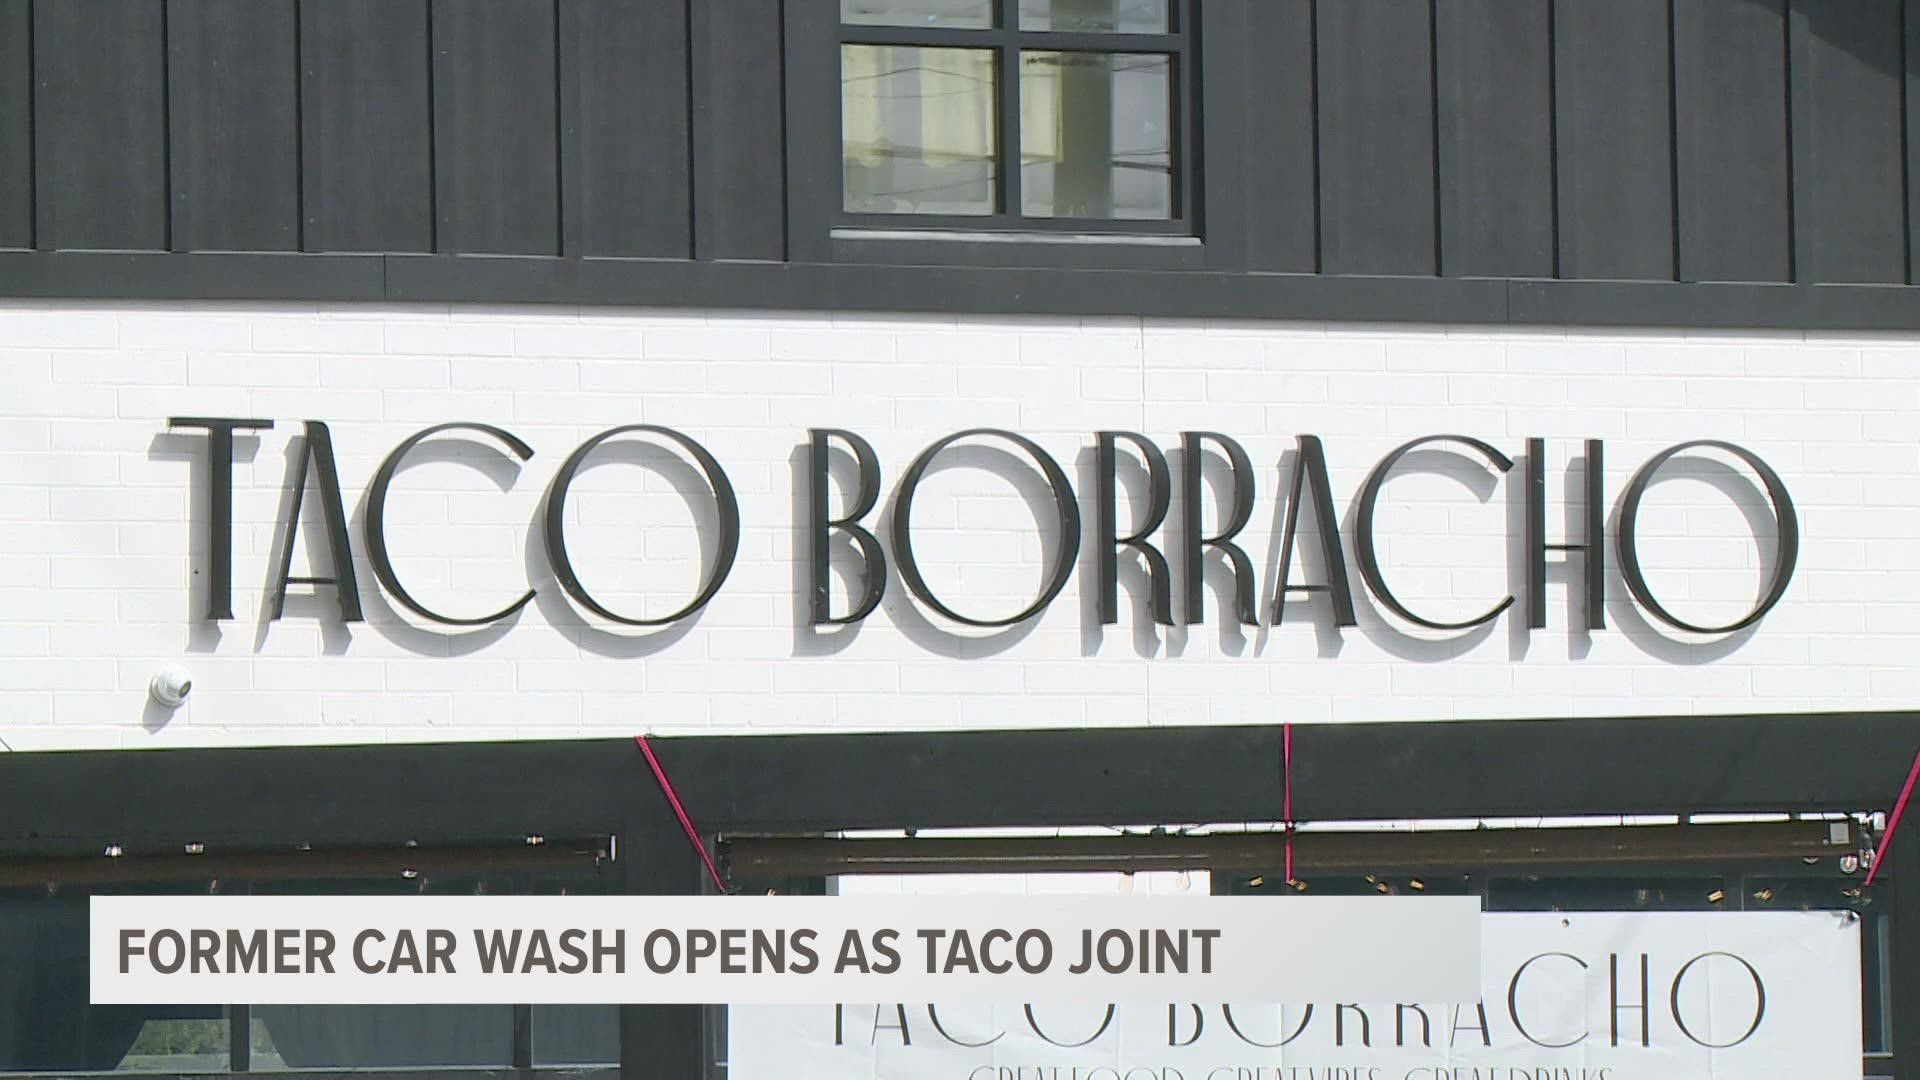 The site of a former car wash in Grand Rapids has been turned into a new Mexican restaurant. Taco Borracho opens Thursday at 11 a.m.